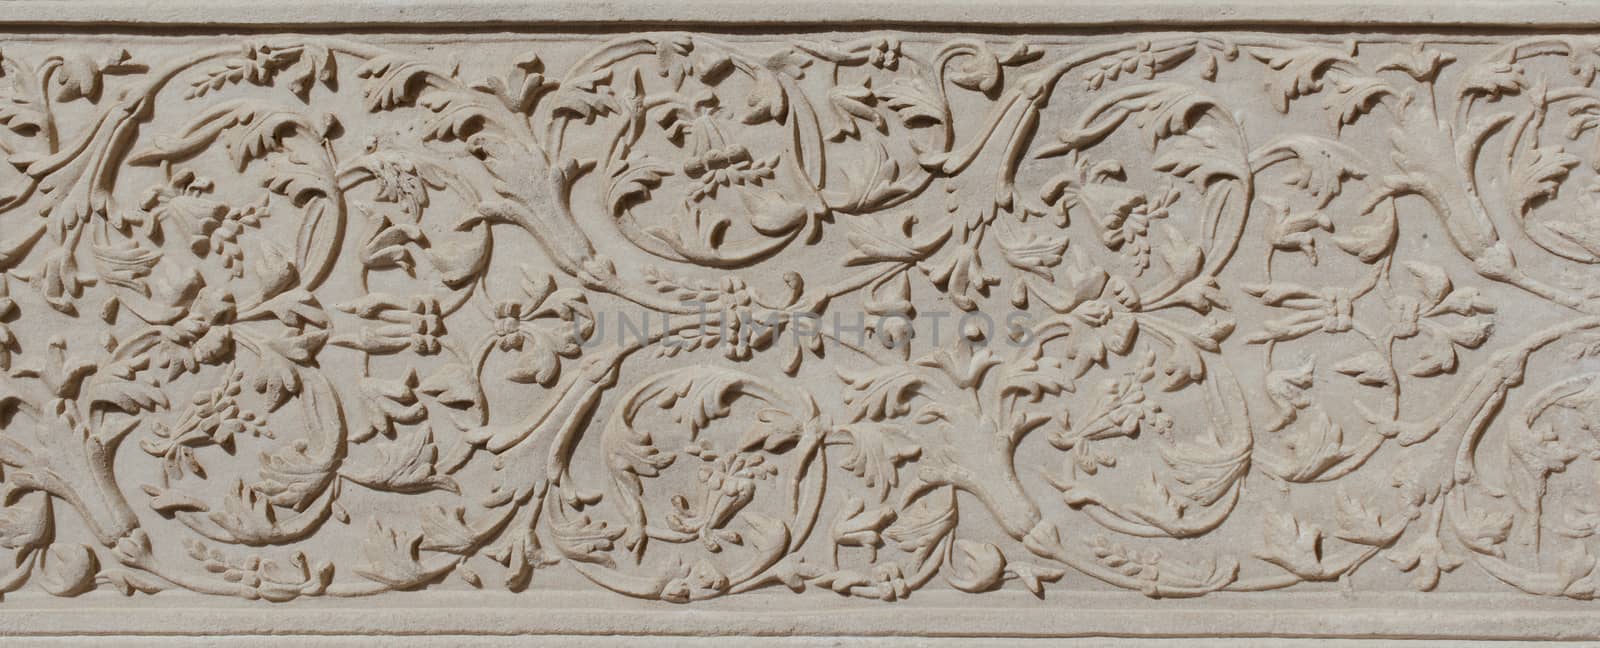 Ottoman marble carving art detail by berkay